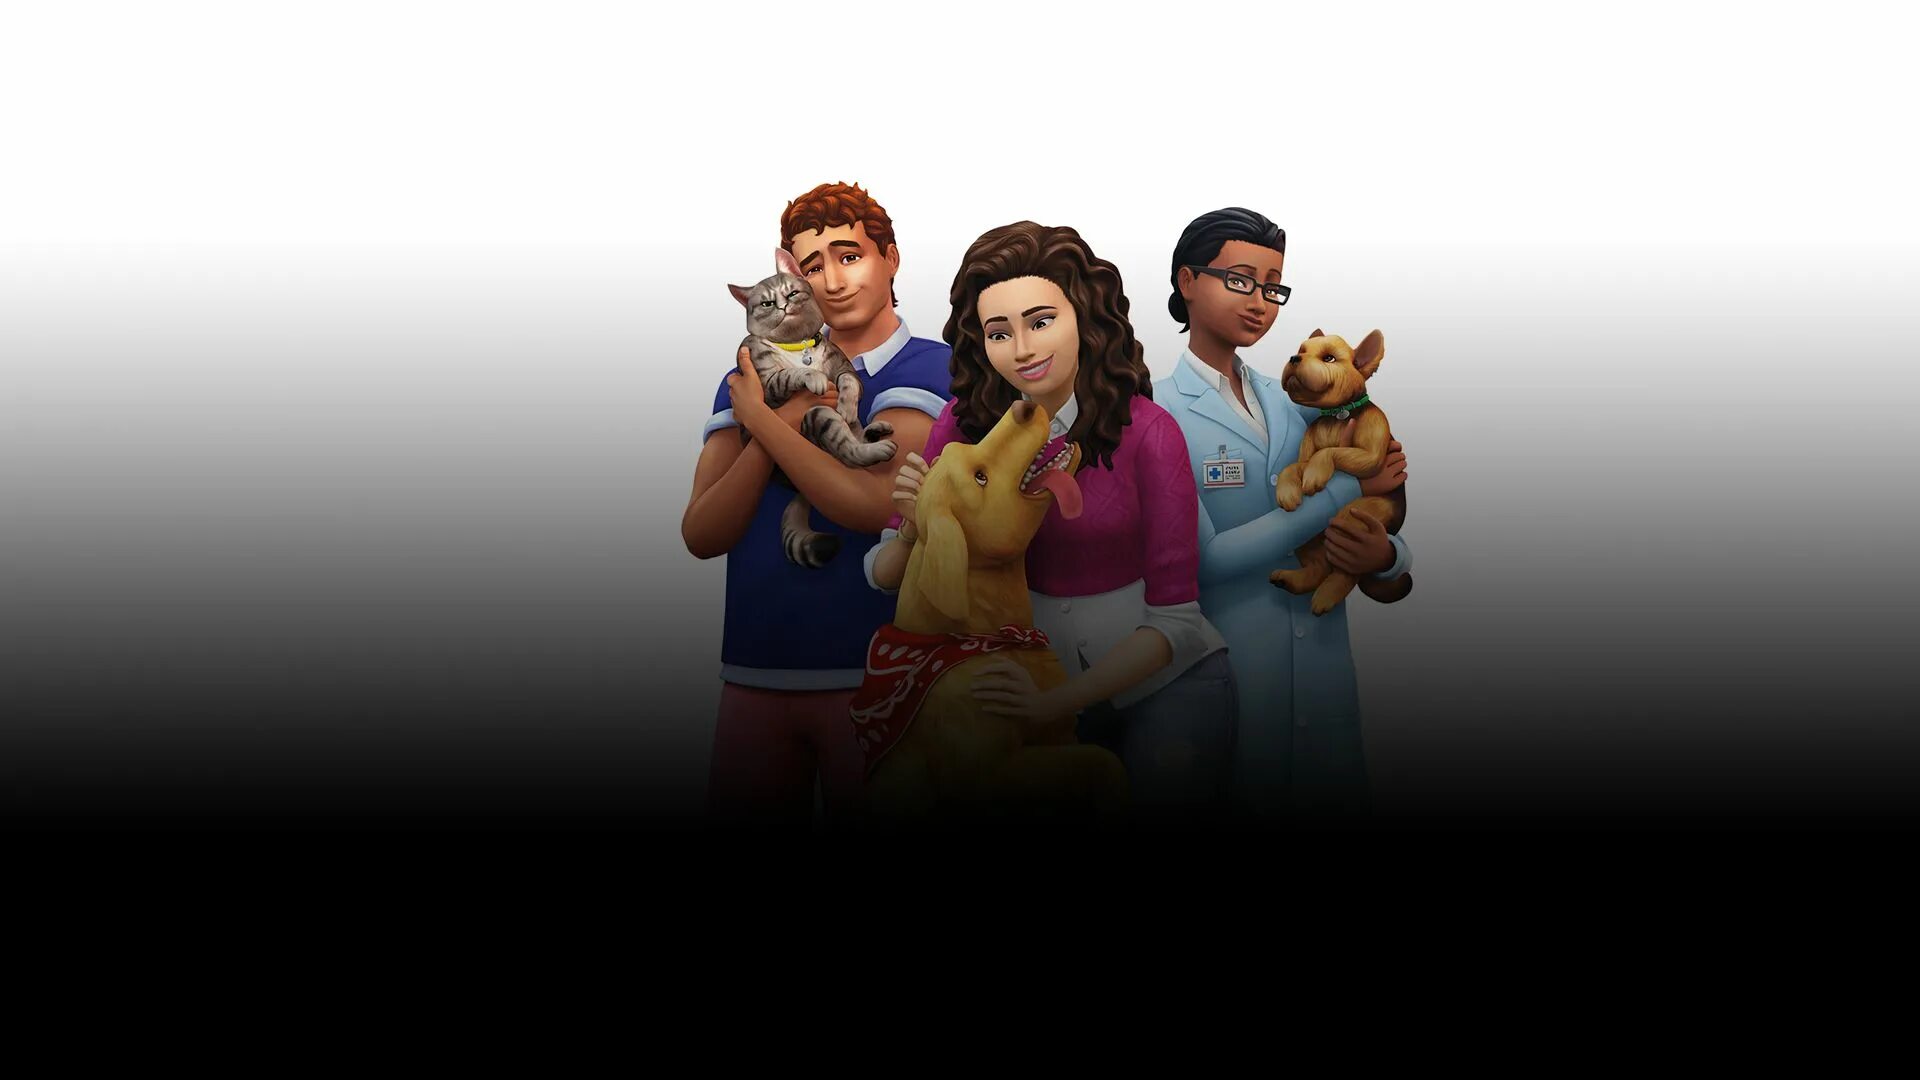 Vc 4 pet. The SIMS 4. кошки и собаки. The SIMS 4: кошки и собаки обложка. The SIMS™ 4 Deluxe + Cats & Dogs Bundle. Wicked Pets SIMS 4.